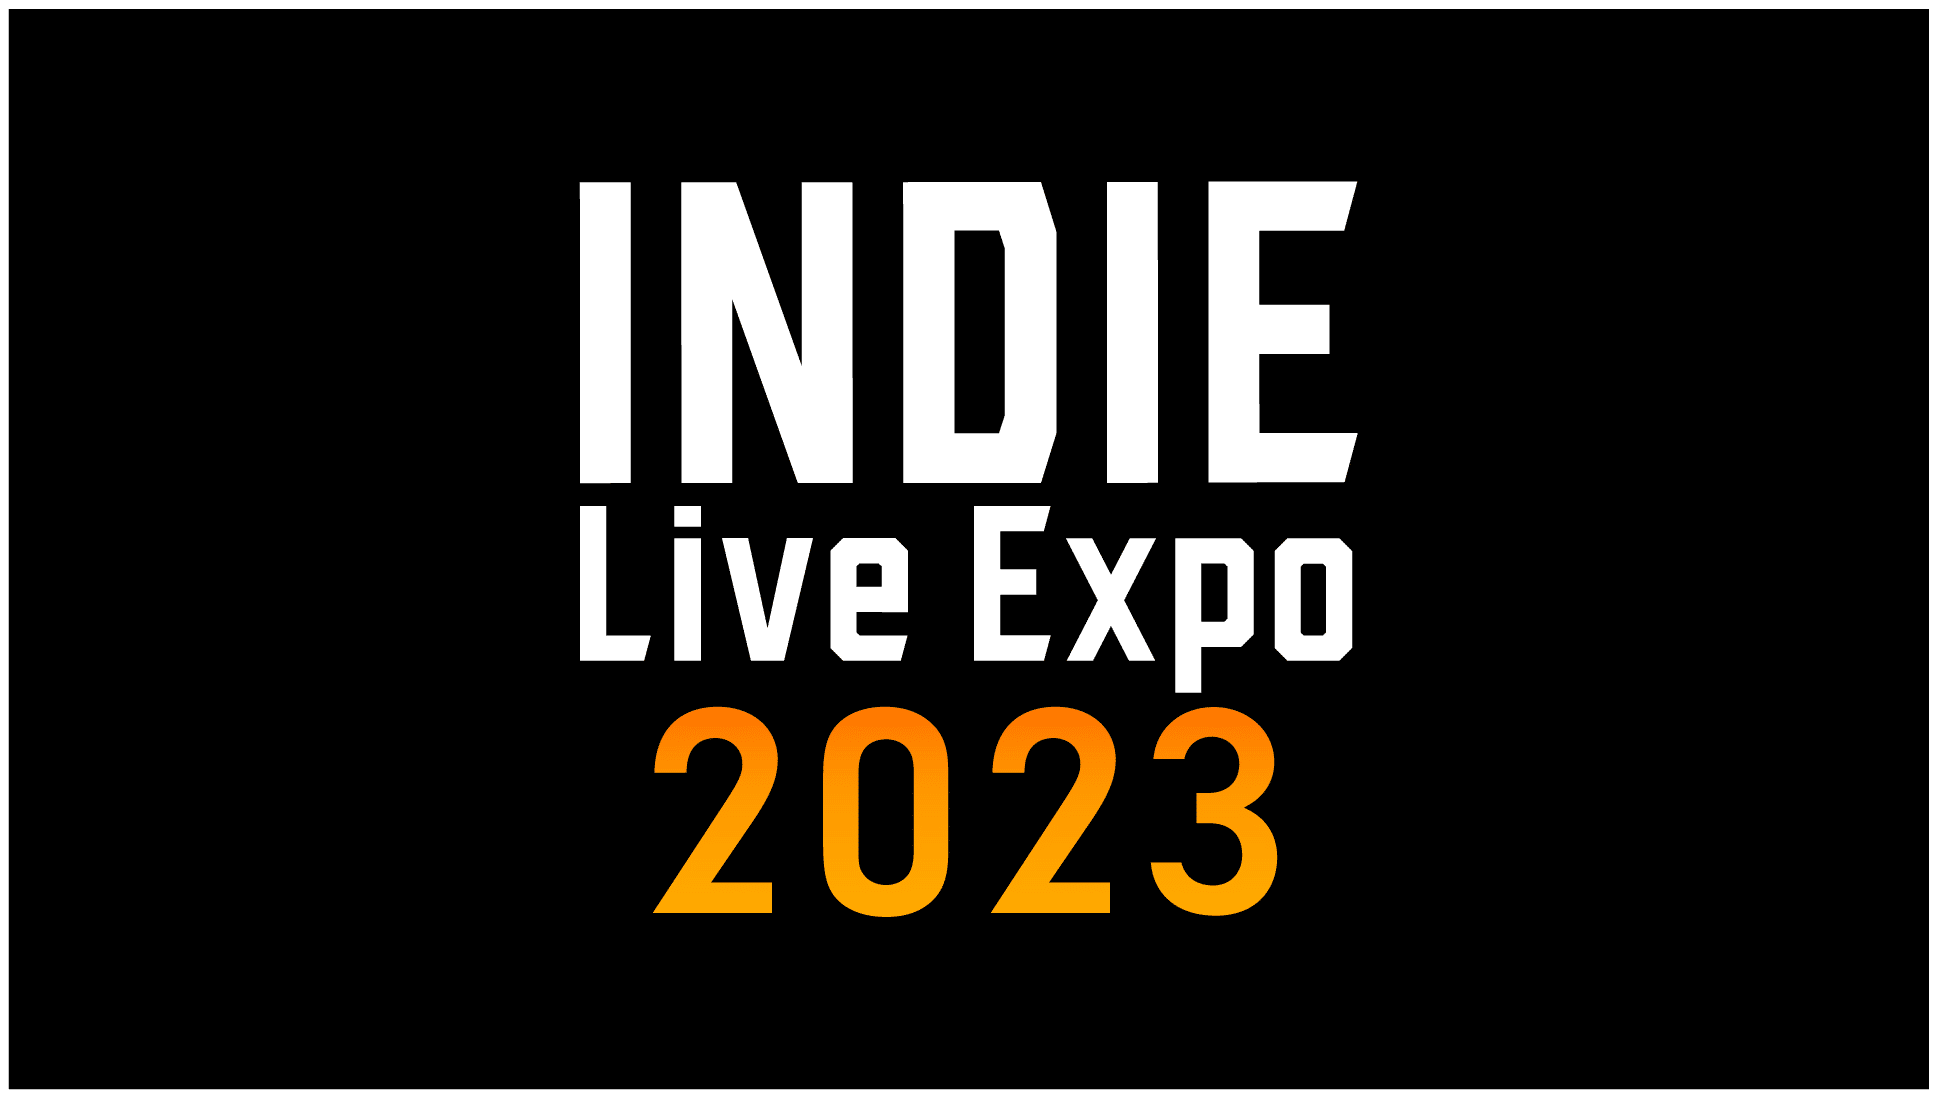 INDIE Live Expo May 2023 Showcase Announces 2-Day Schedule; Over 300 Indie Games Confirmed